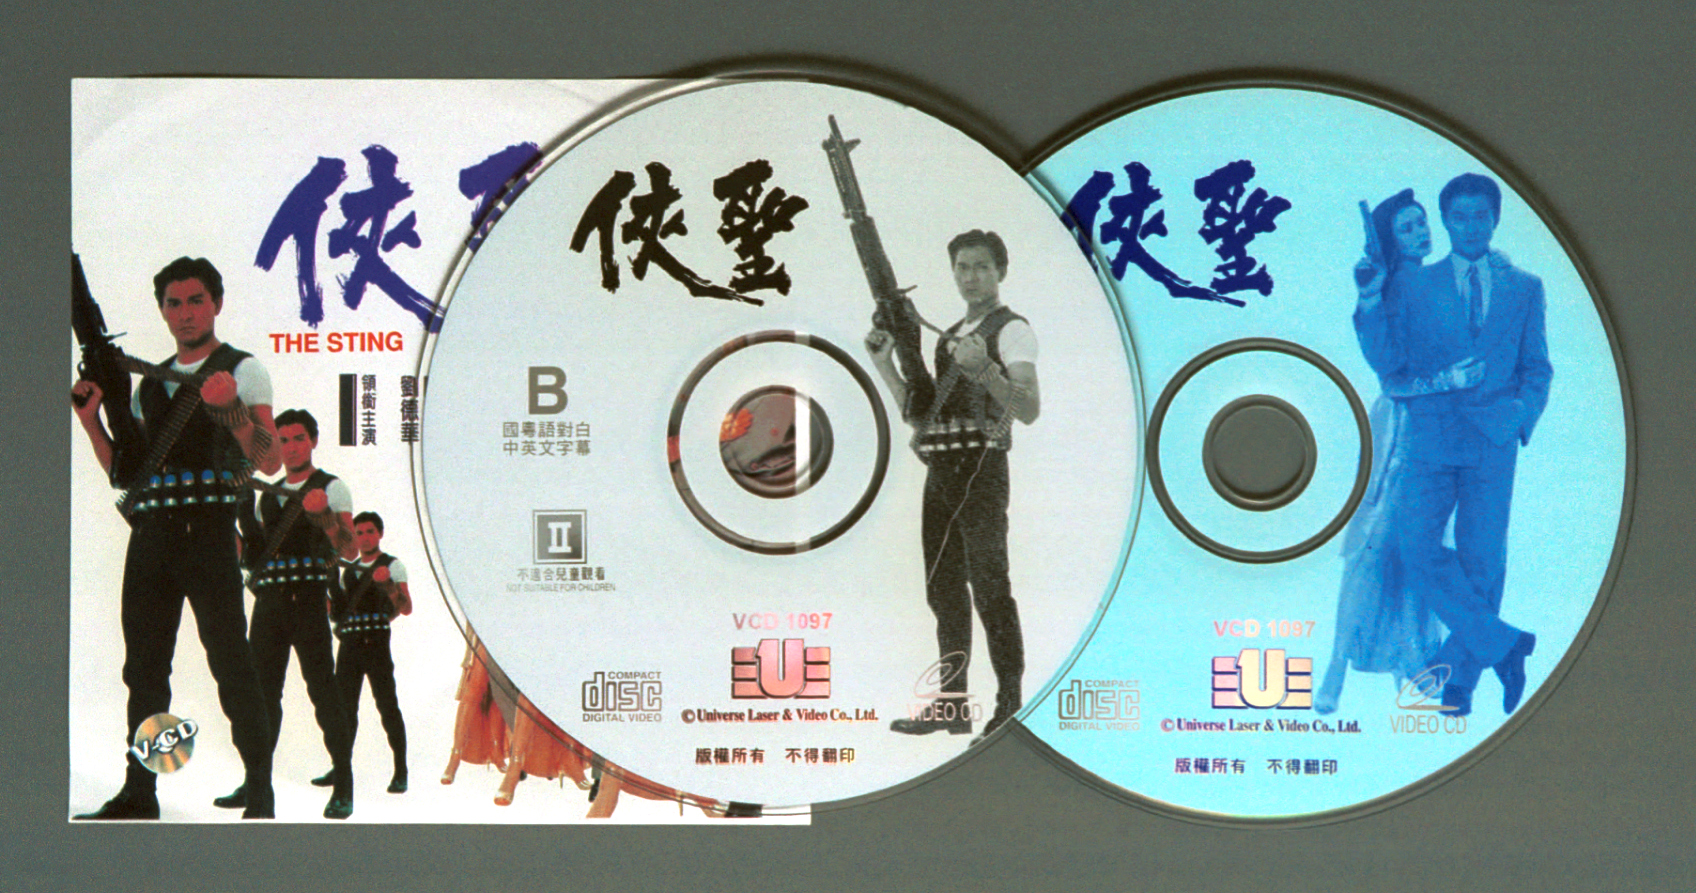 Counterfeiting CD&#039;s is violation of Intellectual Property.